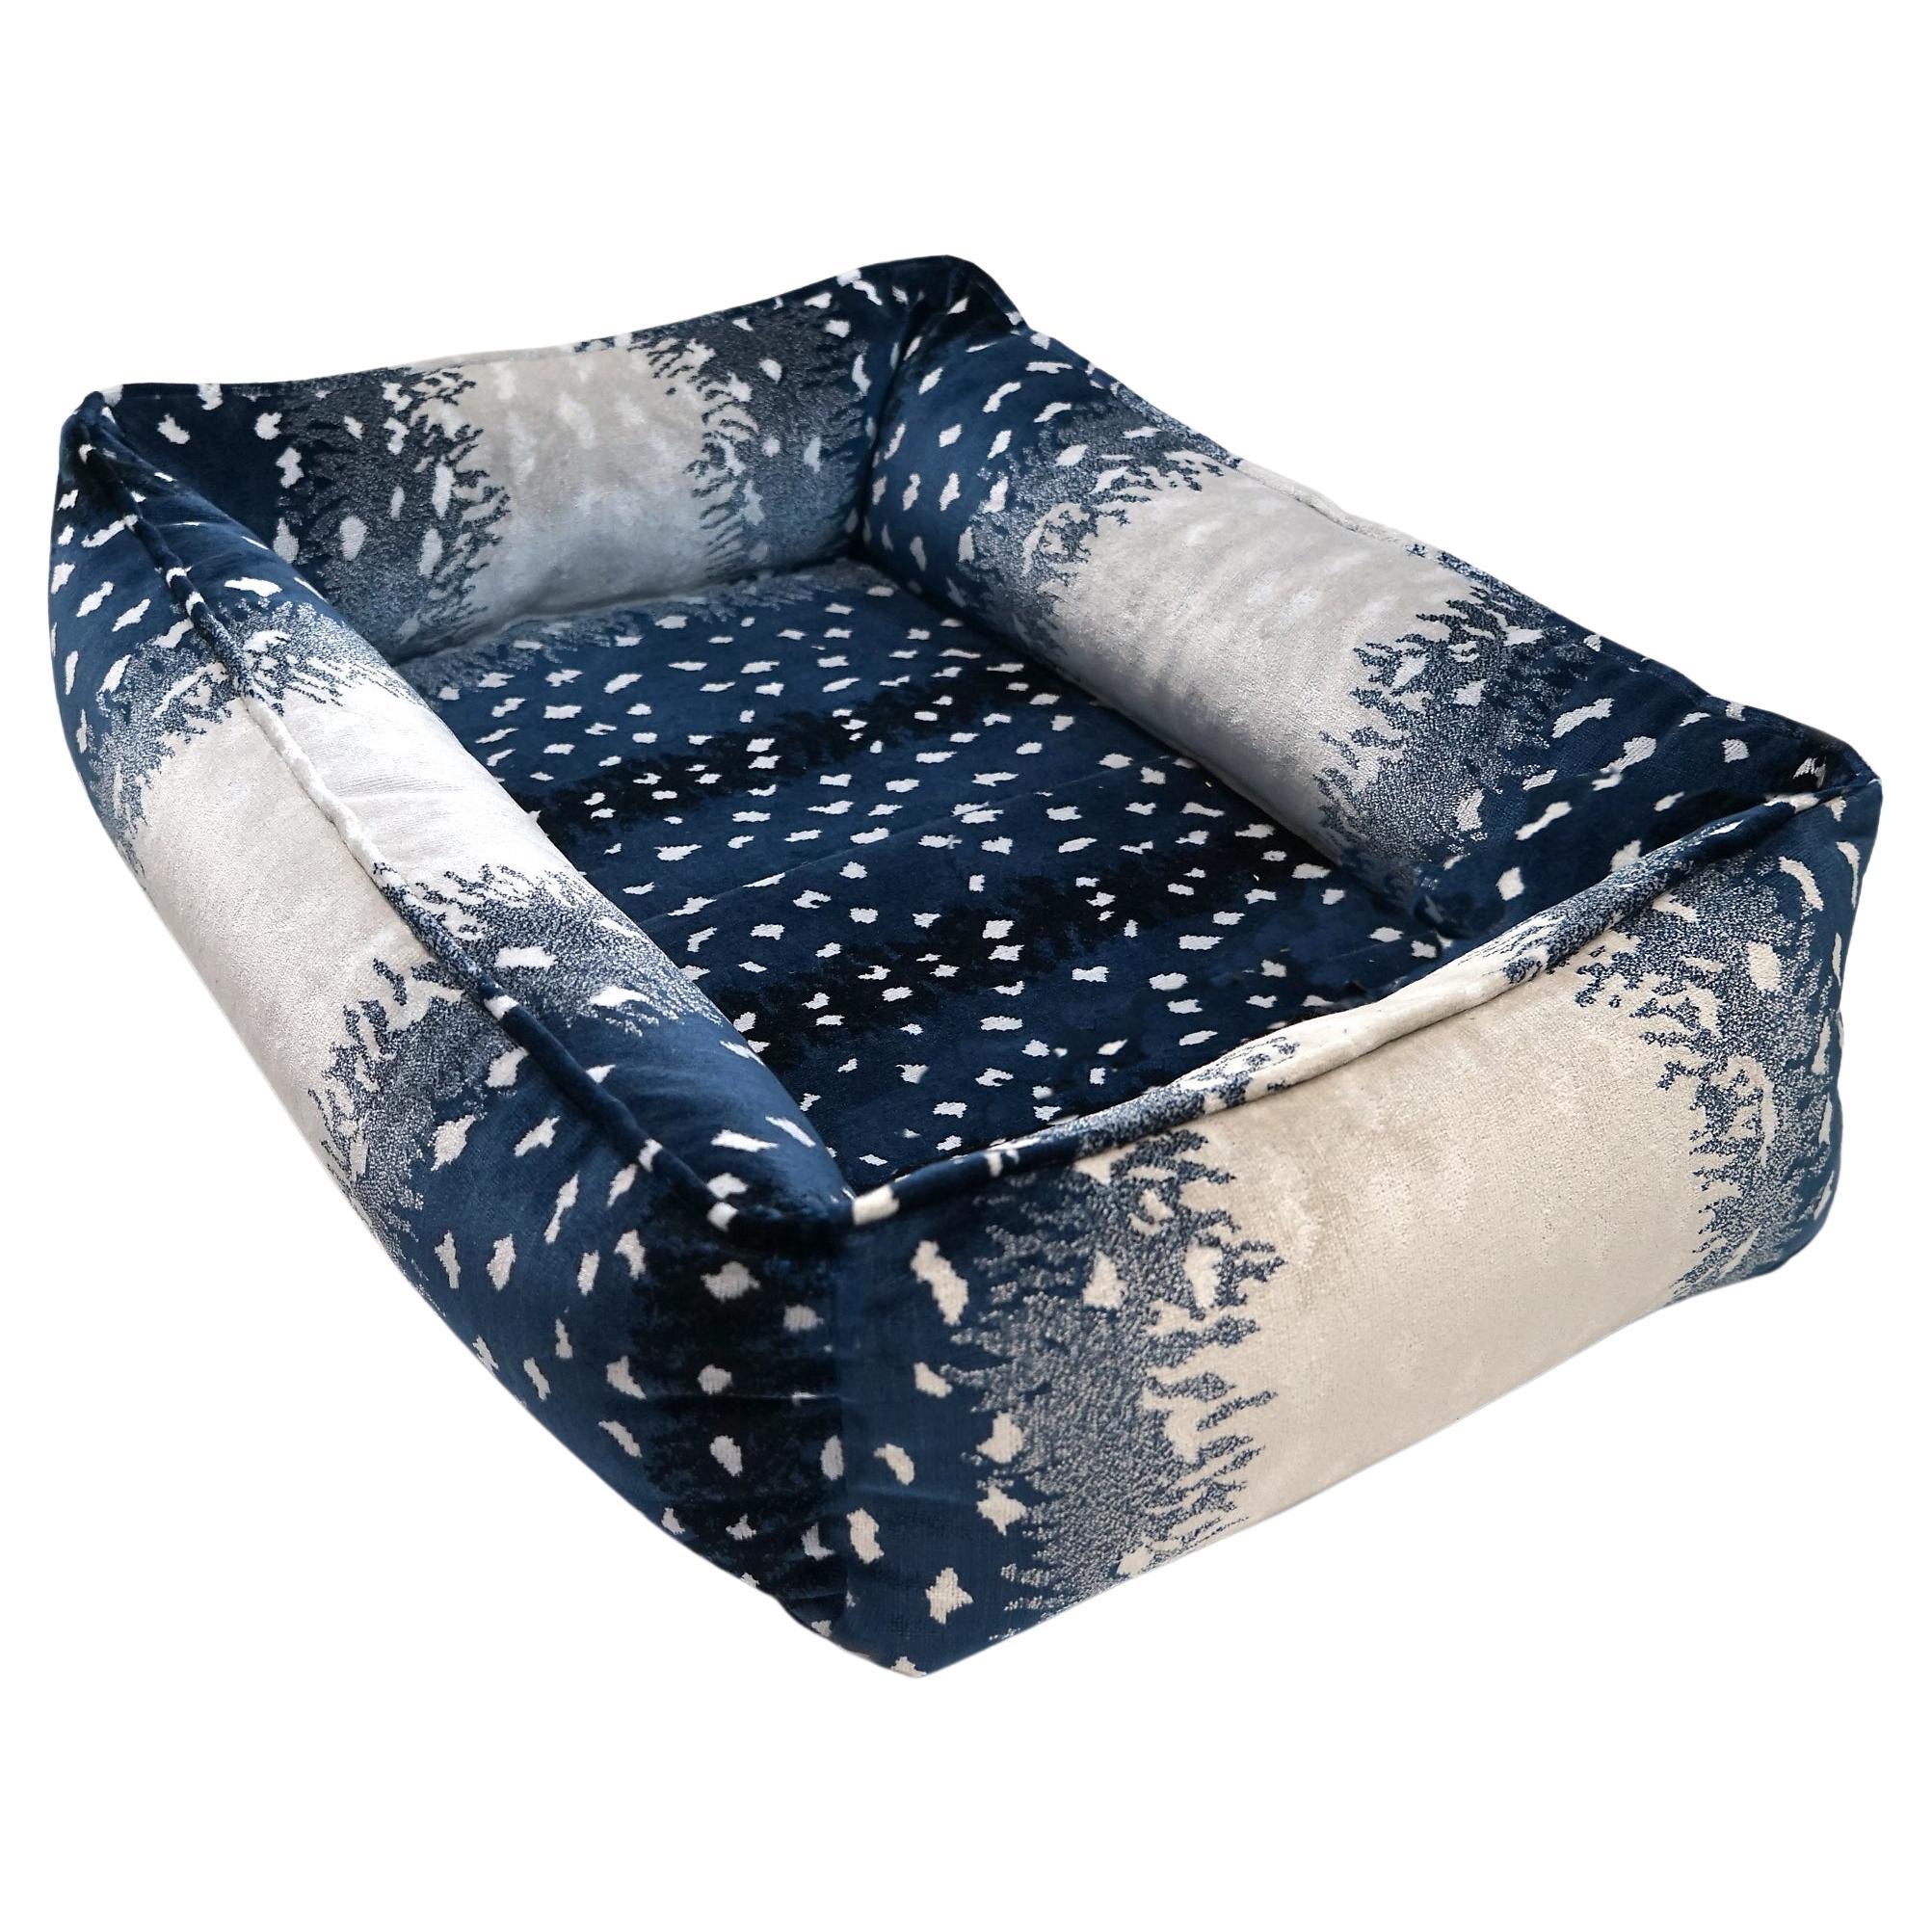 Scalamandre Antelope Small Dog Bed For Sale